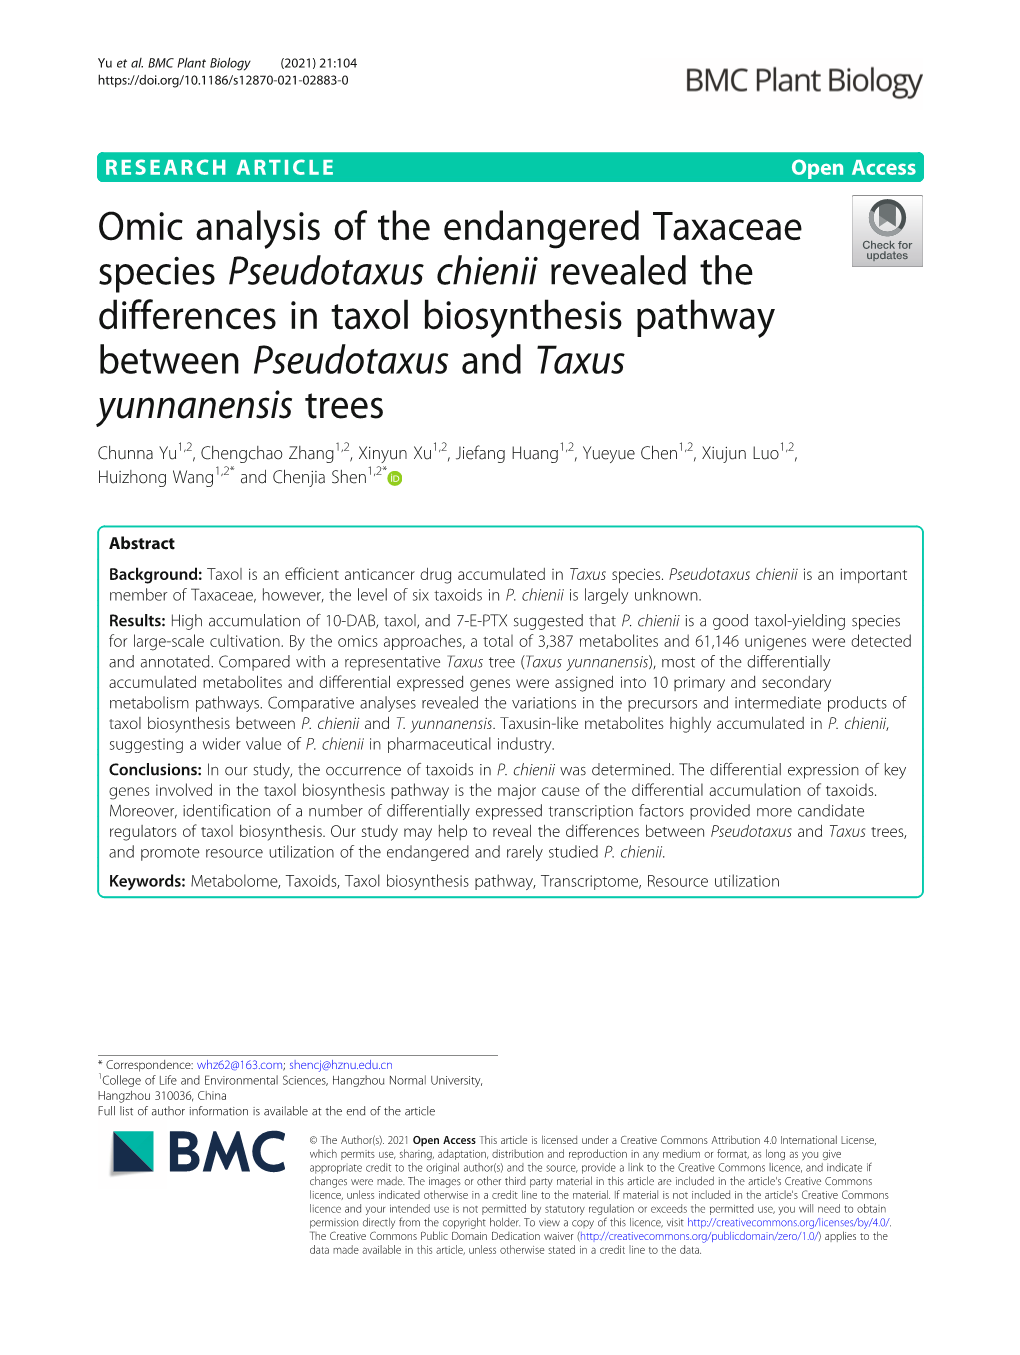 Omic Analysis of the Endangered Taxaceae Species Pseudotaxus Chienii Revealed the Differences in Taxol Biosynthesis Pathway Betw